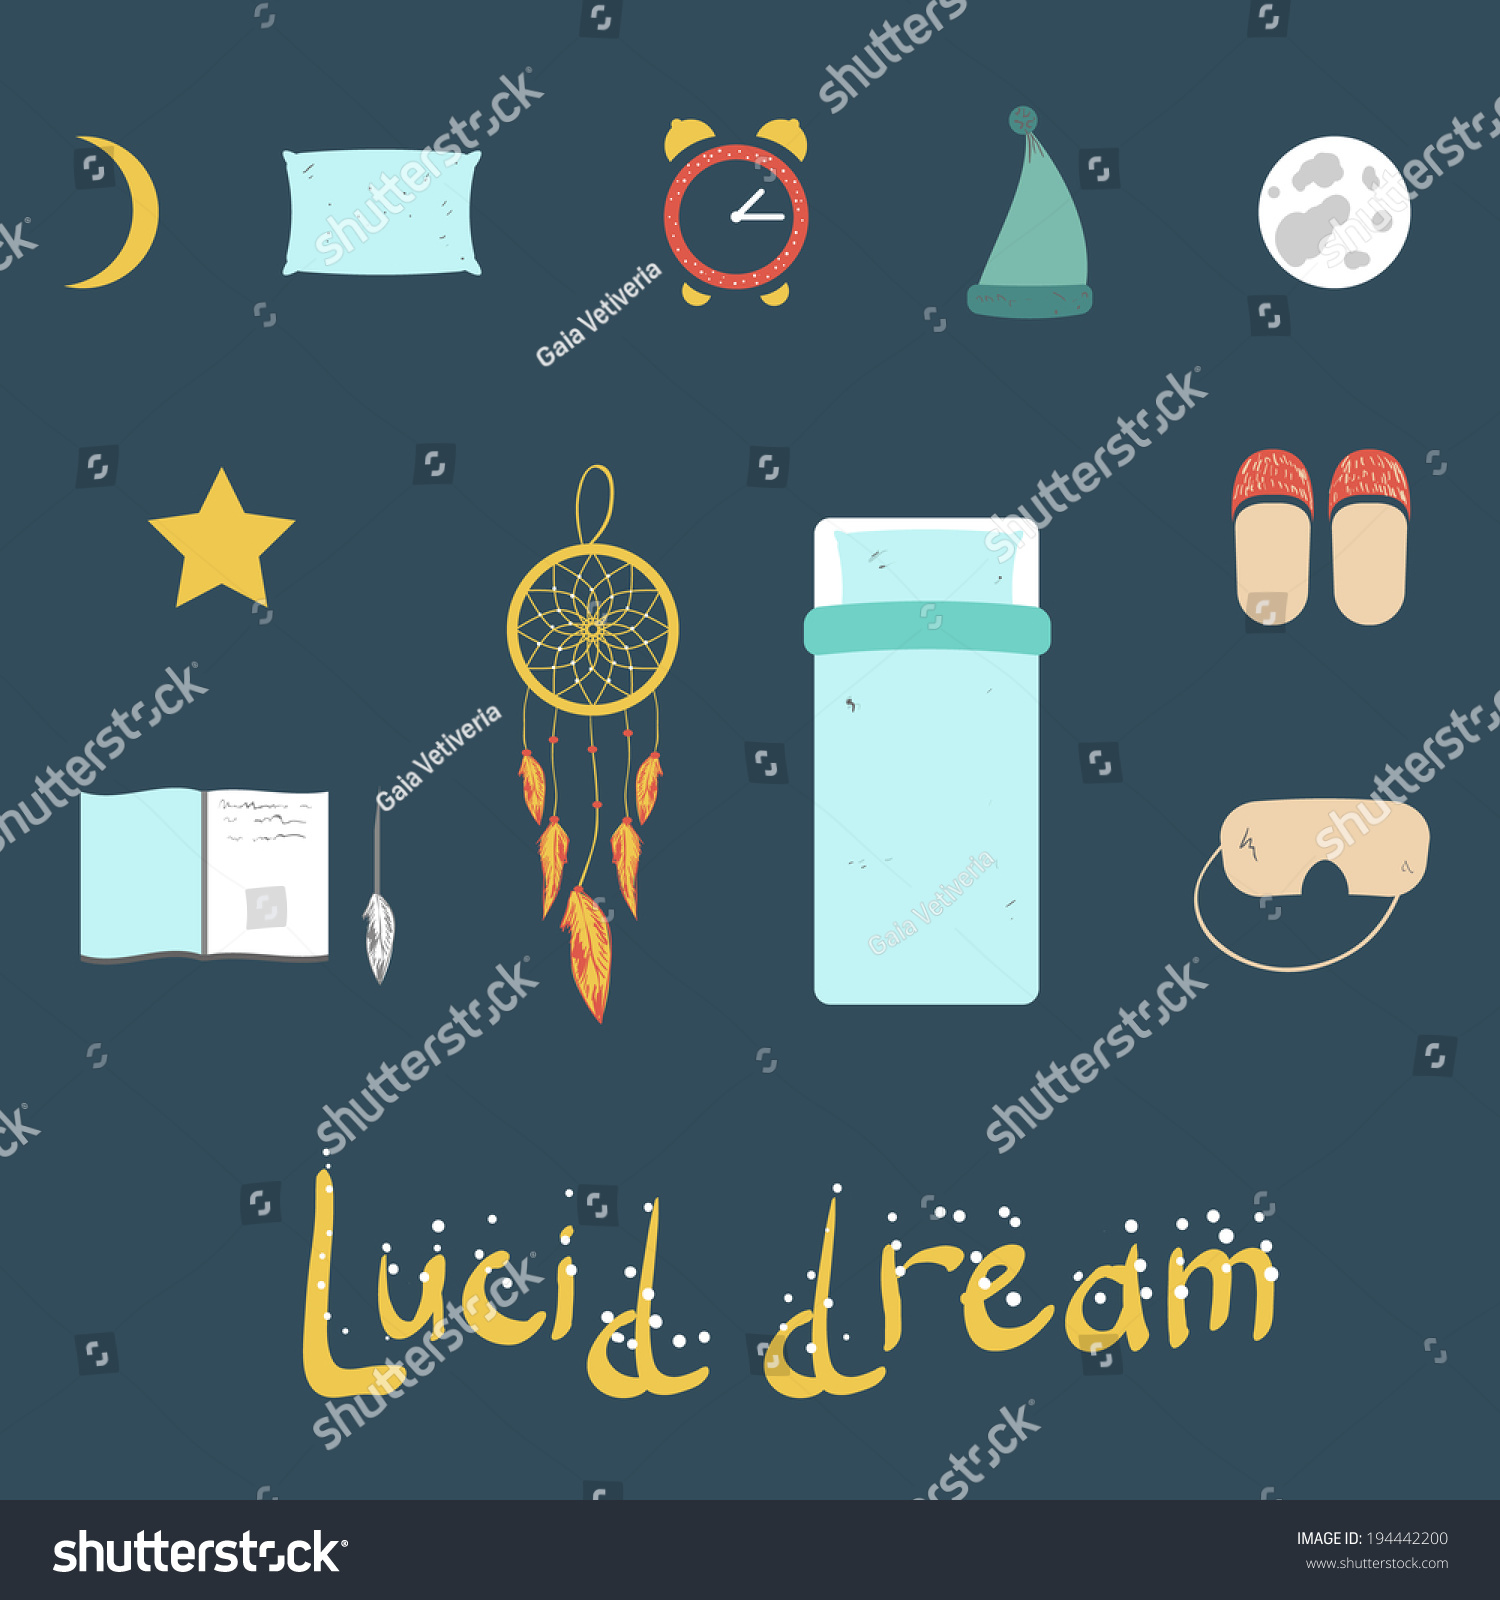 SVG of set of simple icons on a theme night of sleep and dreams svg